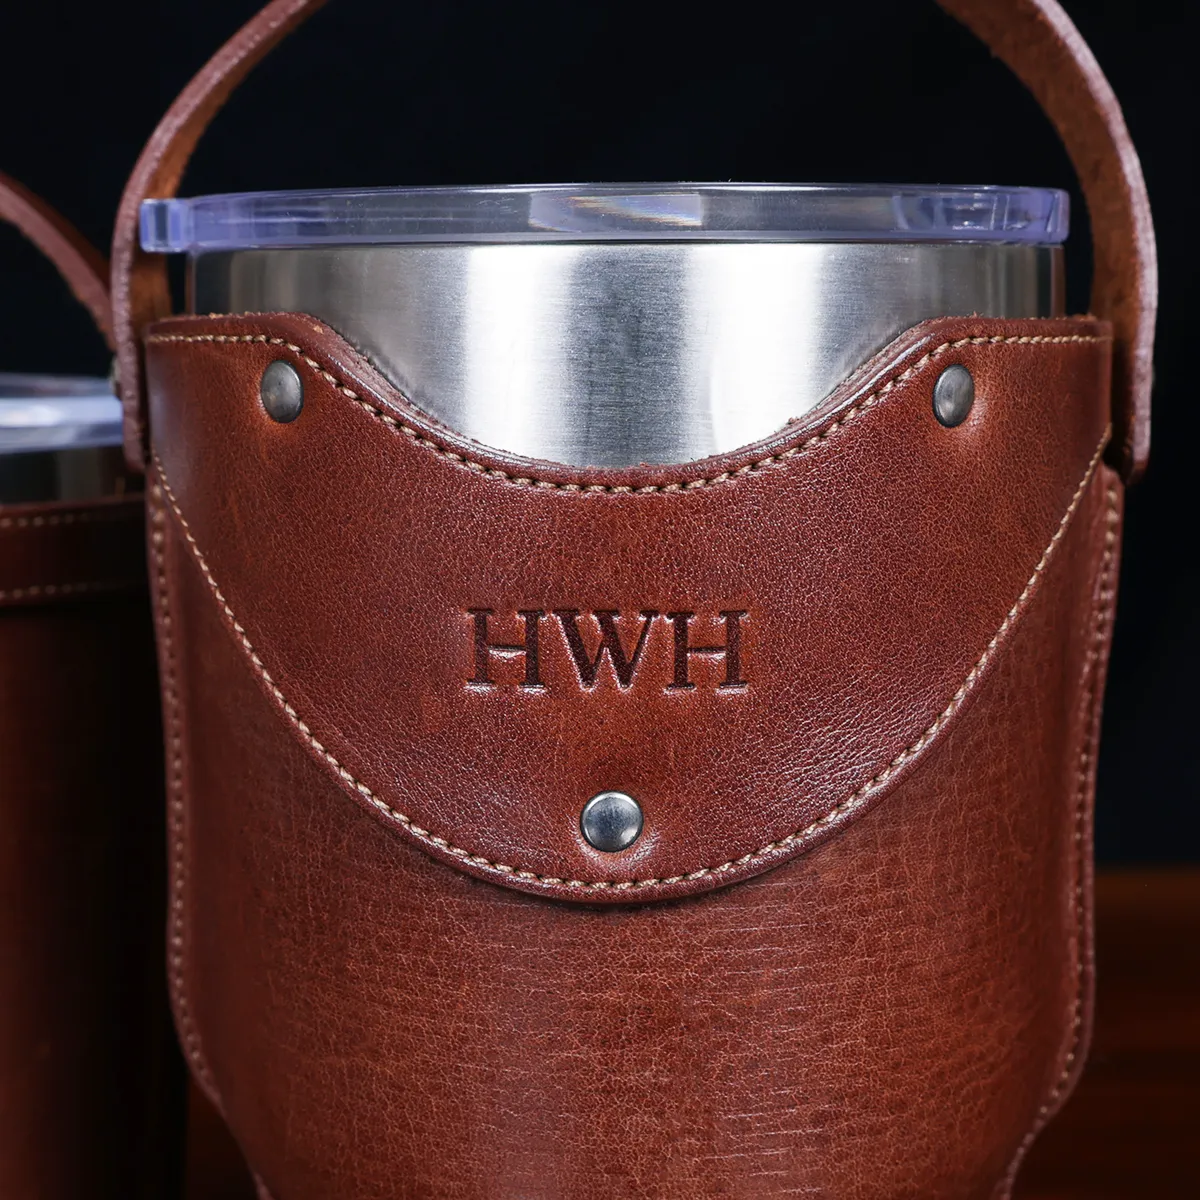 Leather Tumbler Set | Sleeve and Stainless Steel Cup | USA Made